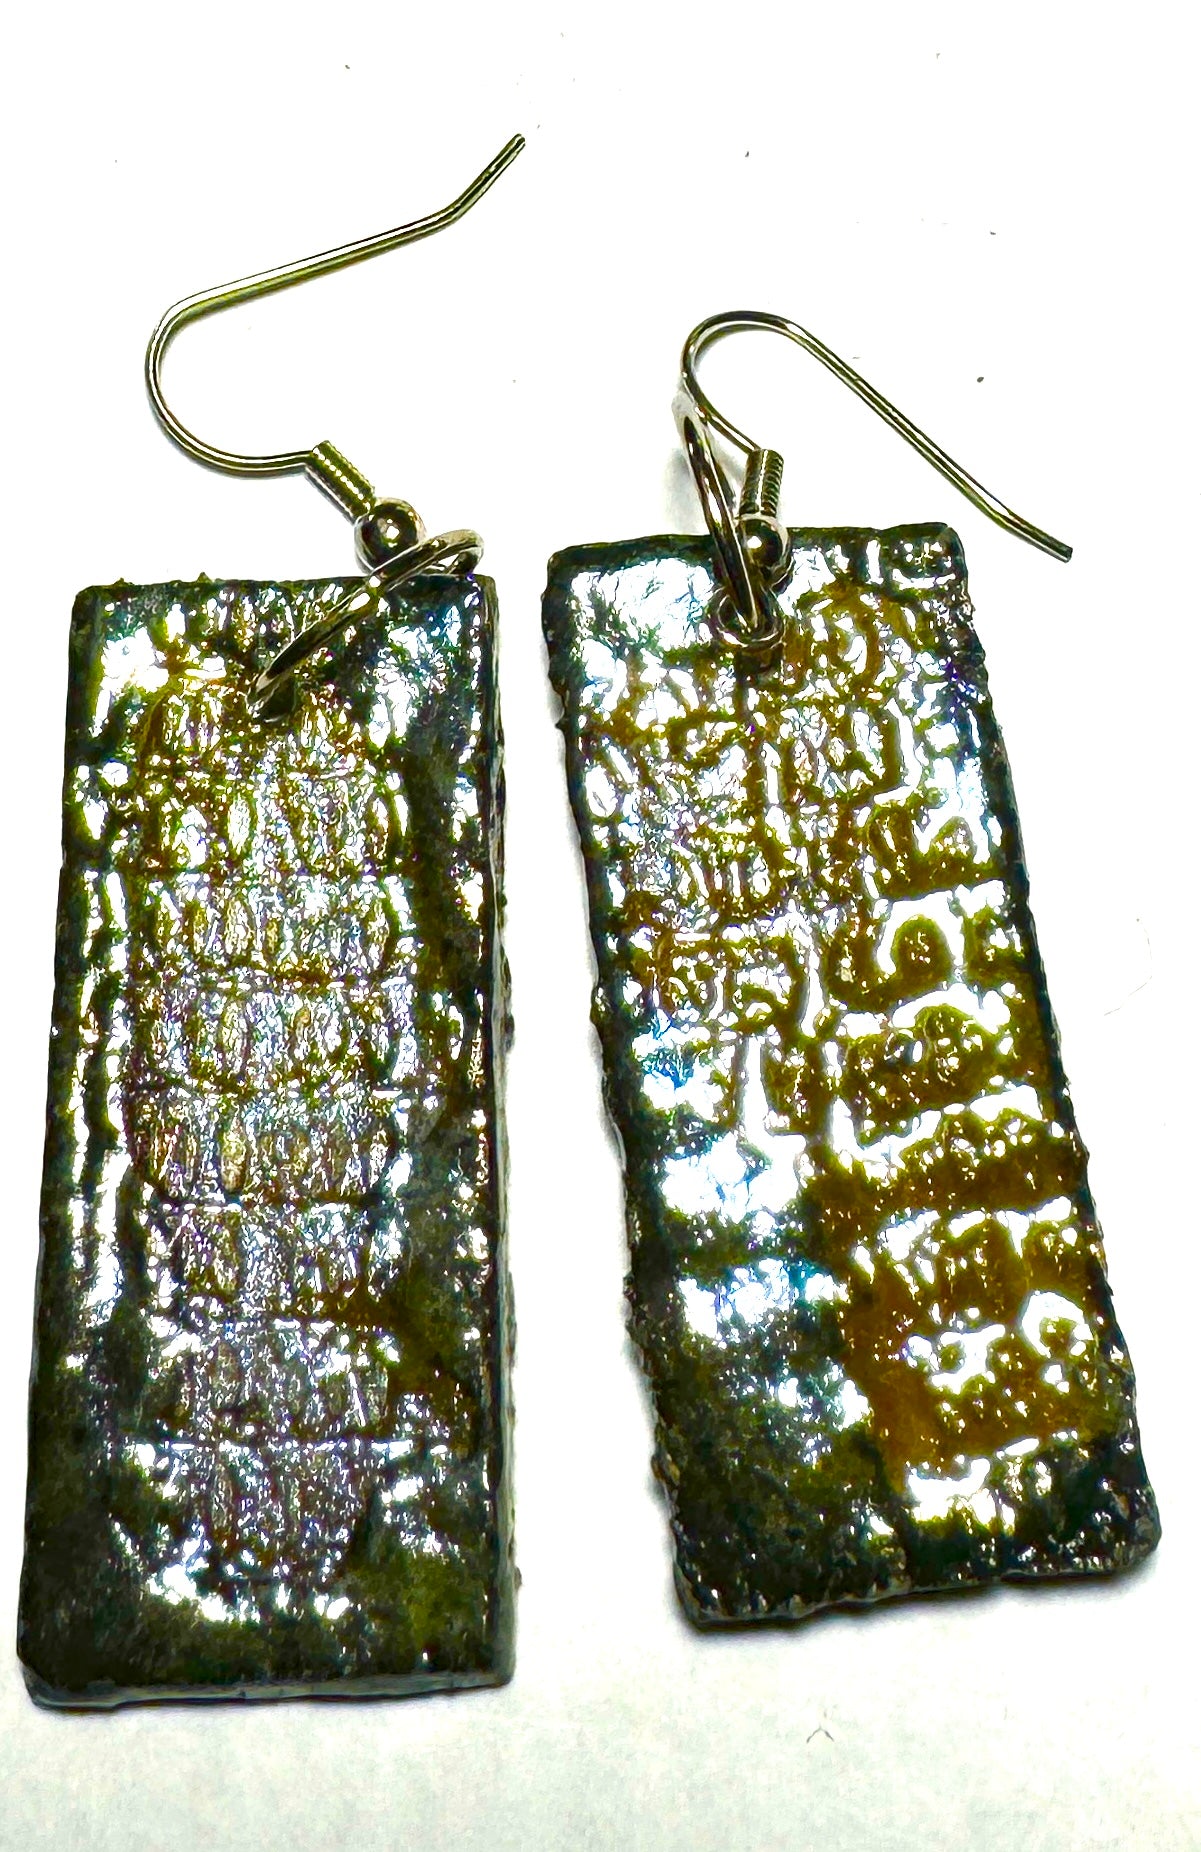 Raku Fired Earrings Shimmery Copper Luster Glazed on both sides 1/2 ounce The Raku Fired Earrings have a unique copper luster glaze that adds a special touch to any outfit. They come in a convenient 1/2 ounce pack, so you can easily take them on the go.